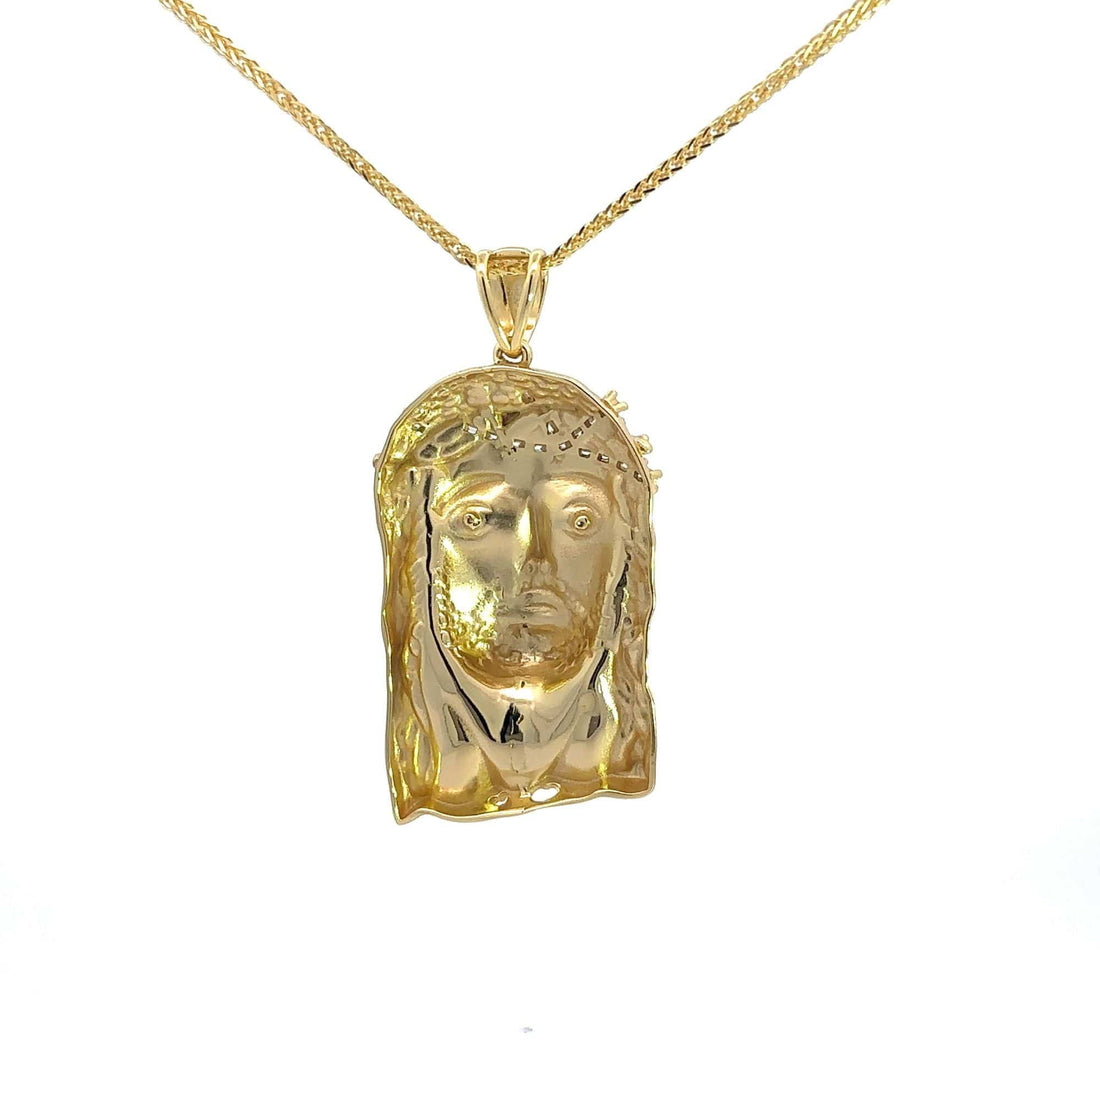 Baikalla Jewelry 14K Pure Yellow Gold Pendant Sterling Silver Gold Plated Jesus Moissanite Charm Necklace